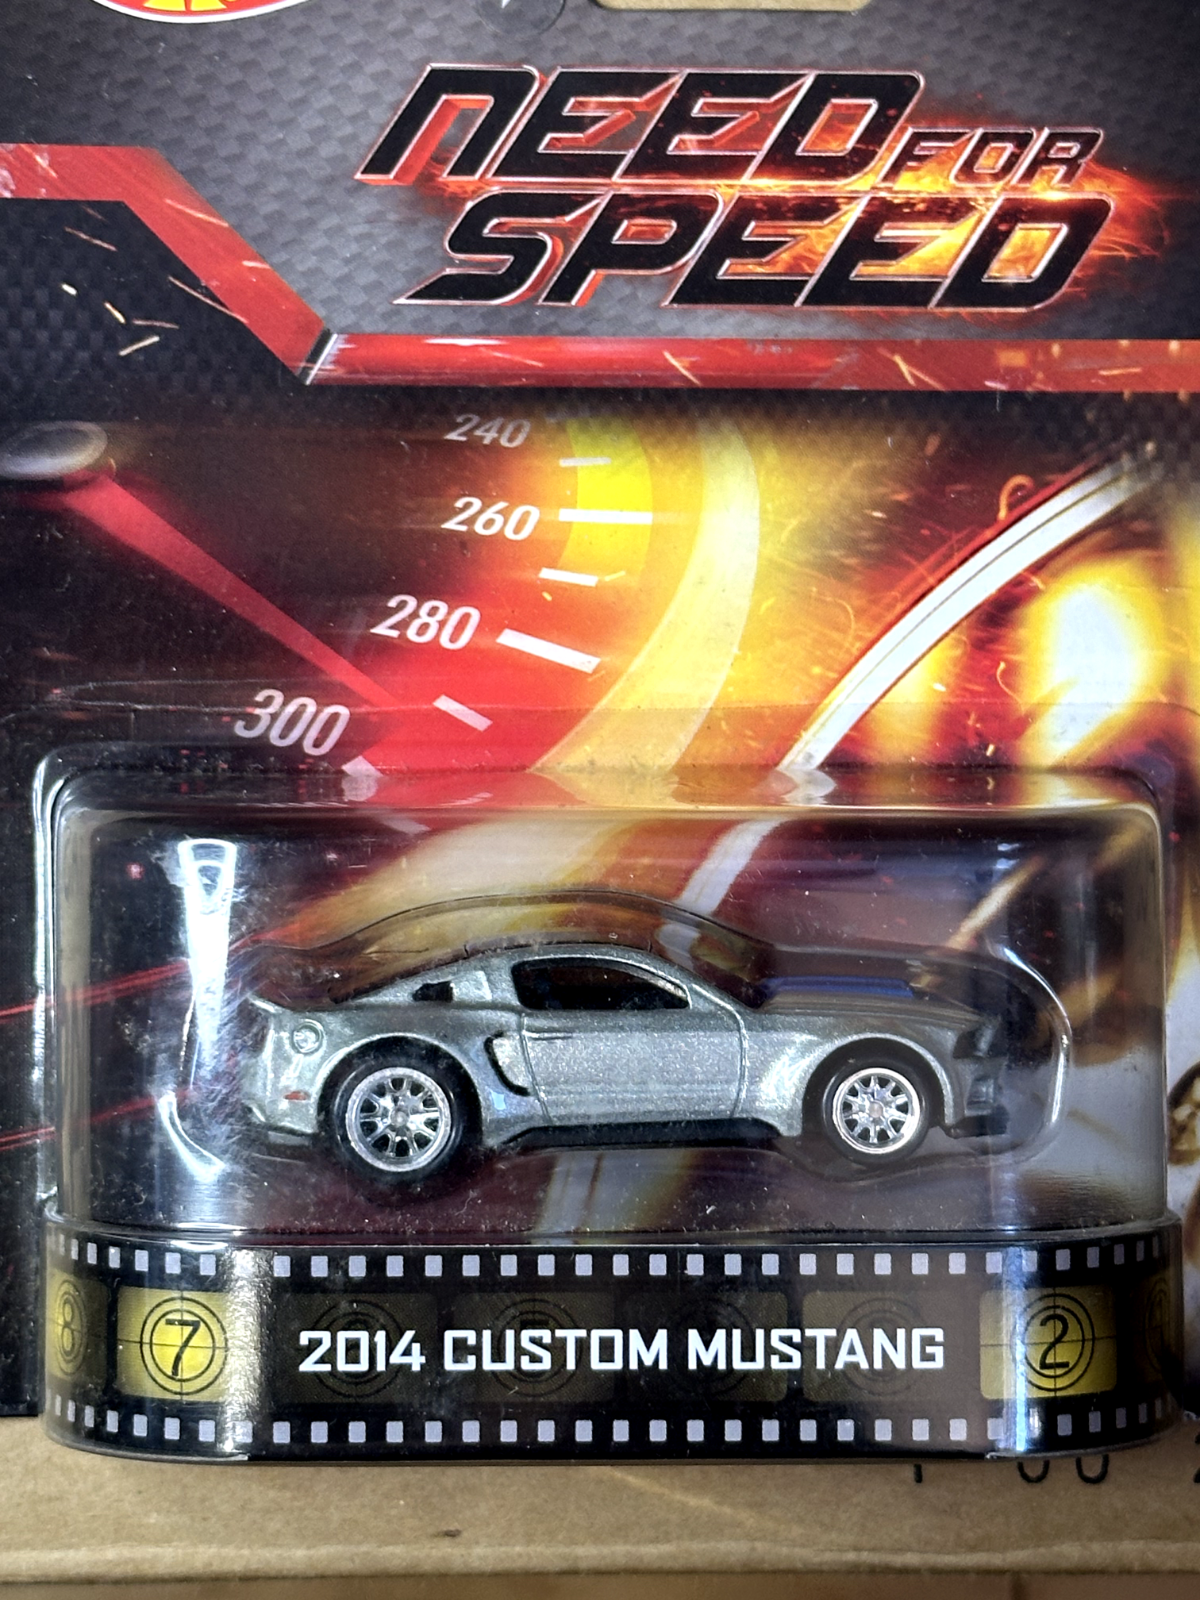 2013 Hot Wheels Retro Entertainment Need For Speed 2014 Custom Ford Mustang